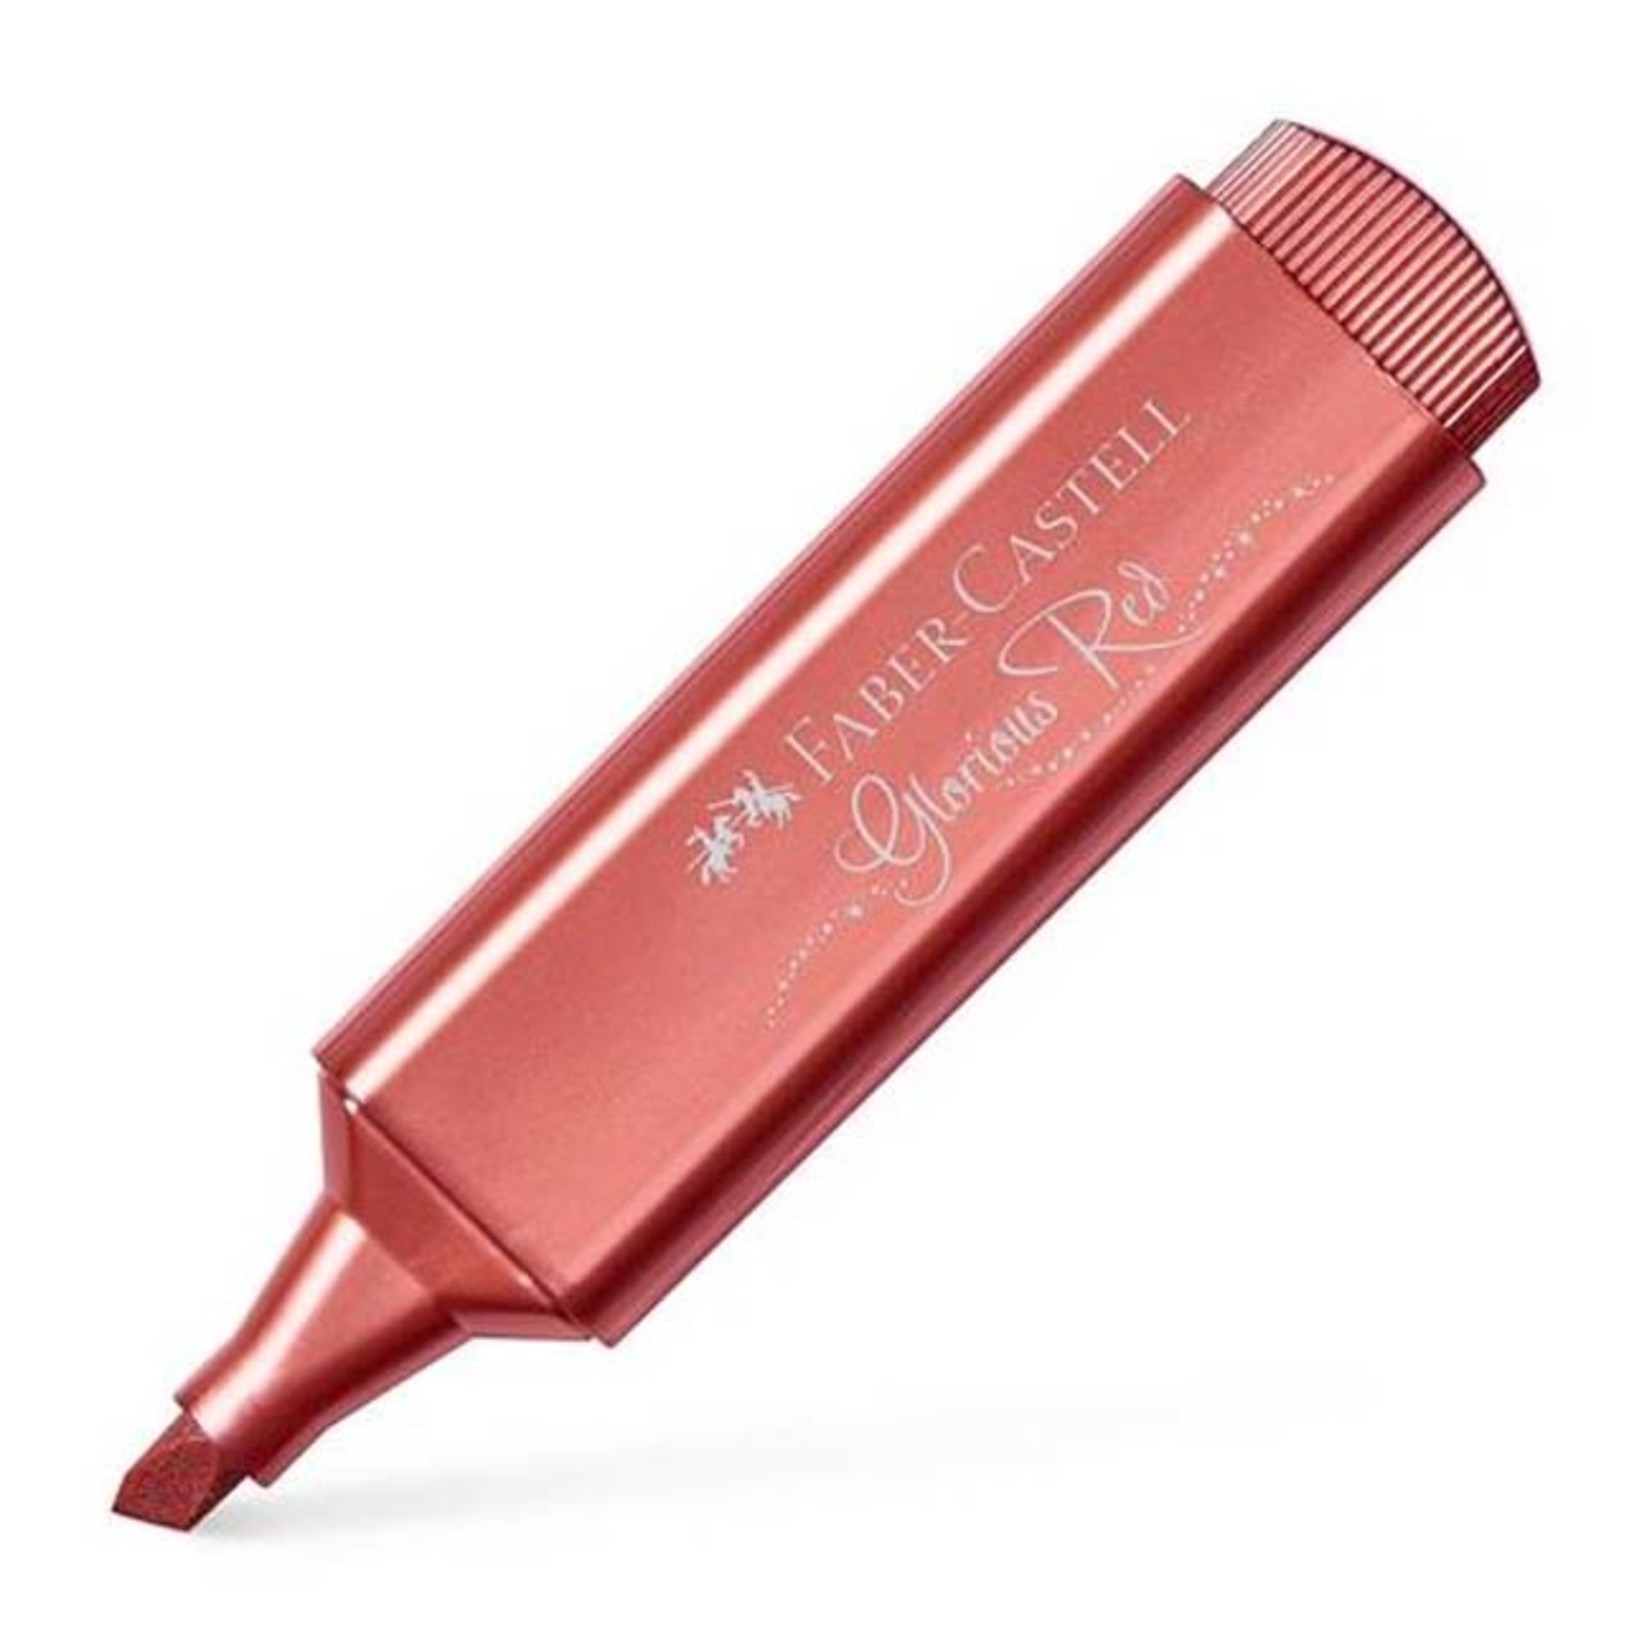 FABER CASTELL METALLIC HIGHLIGHTER GLORIOUS RED